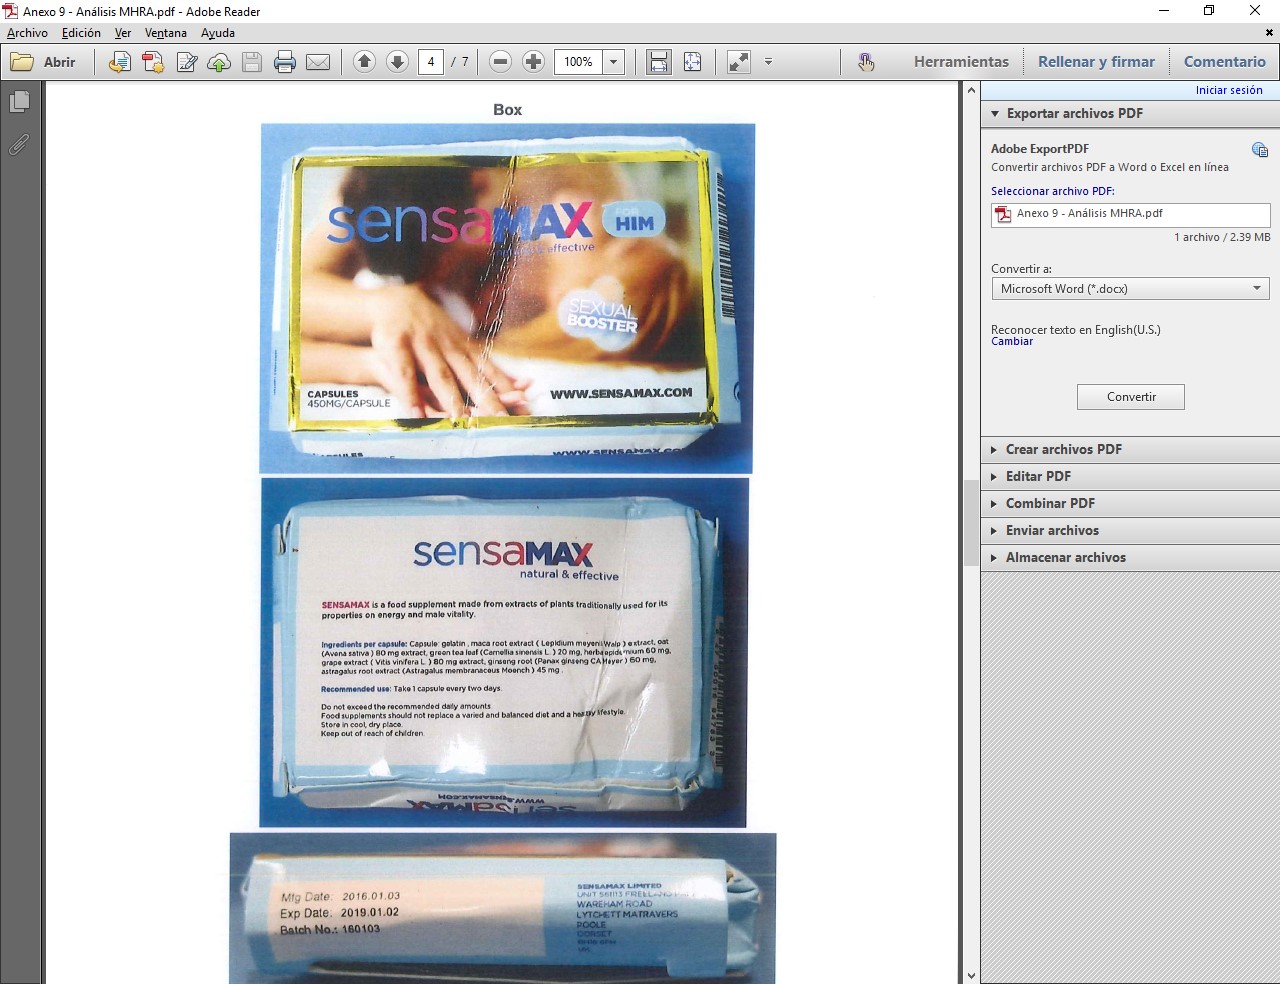 Image of the illigal product: Sensamax For Him